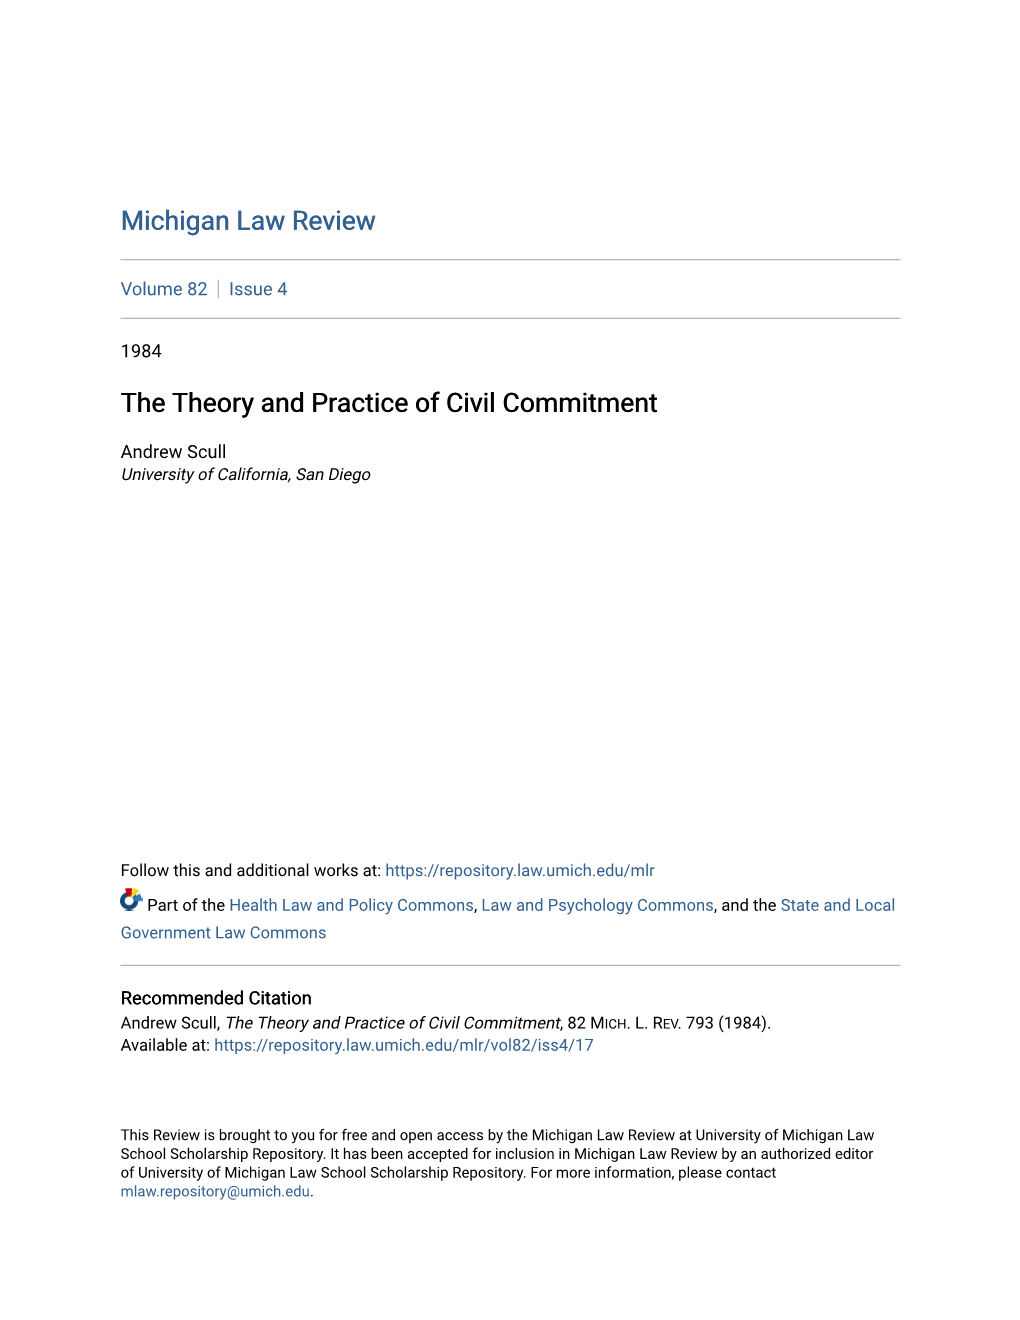 The Theory and Practice of Civil Commitment